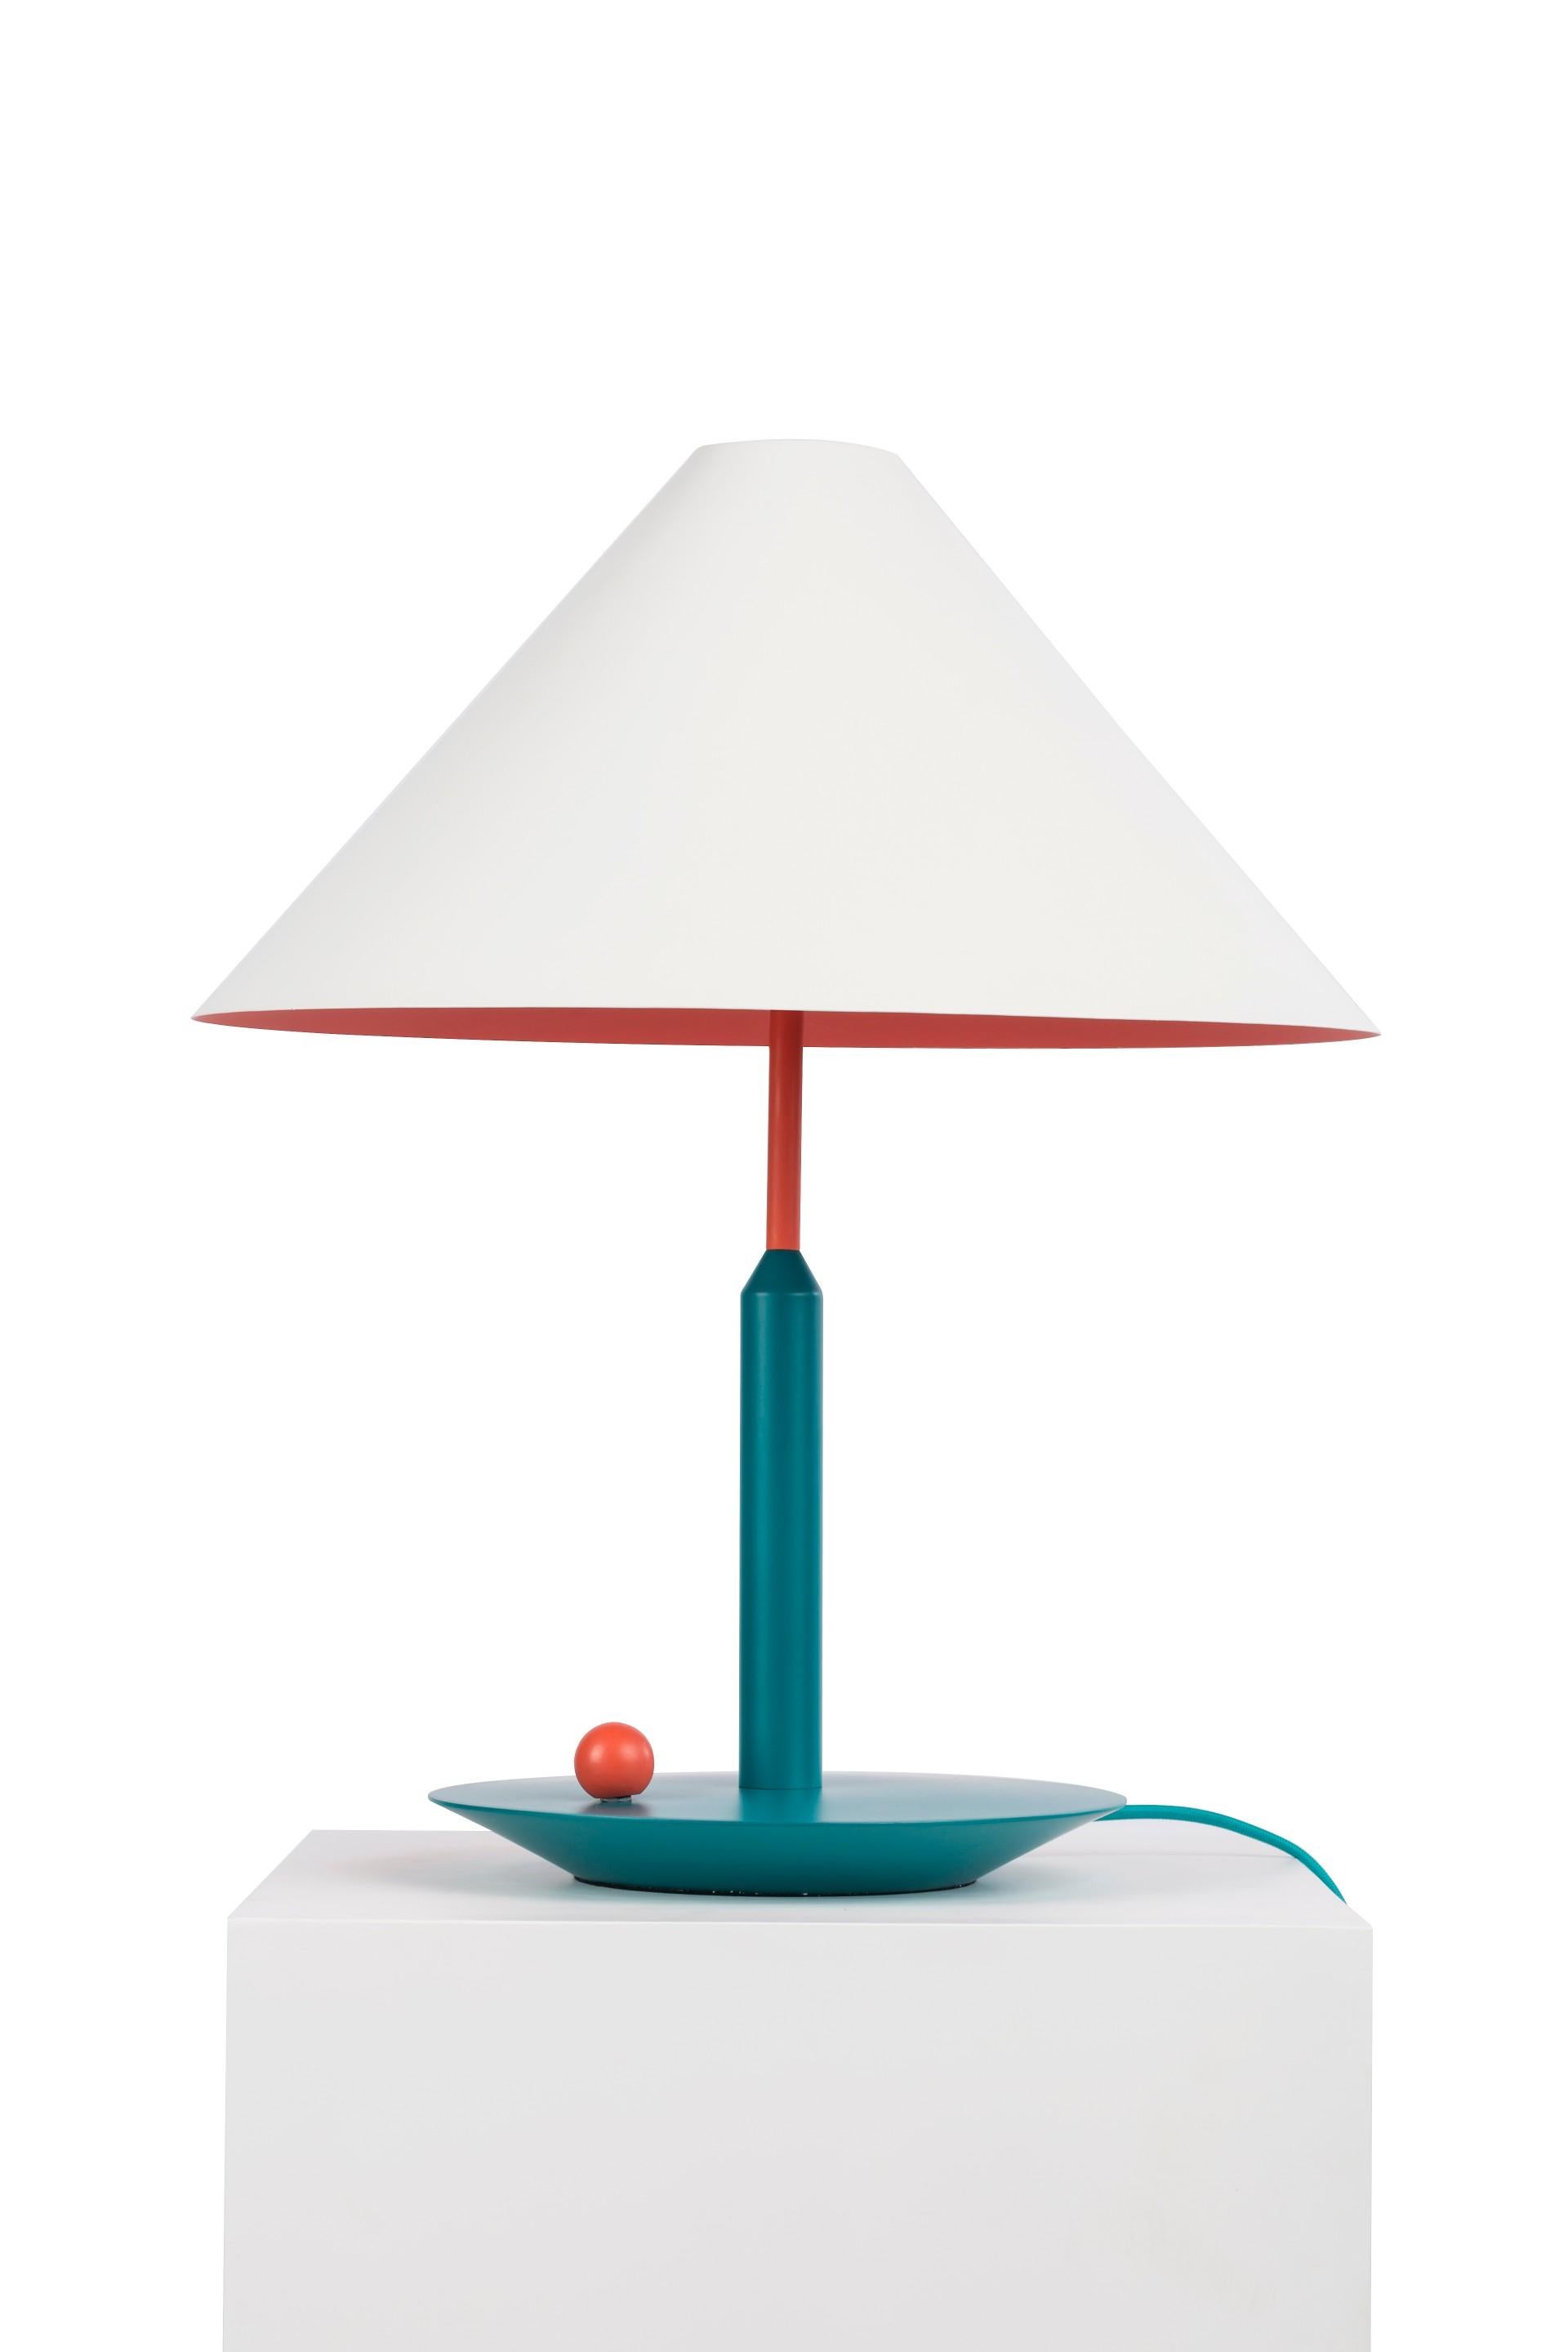 Colorful table lamp by Thomas Dariel, Maison Dada
Measures: Diameter 45 x height 55 cm
Tricolored
Powder coated metal shade in matte white
Vibrant complementary tones on lampshade’s interior and base
Color cable
220V – 240V 50Hz E27